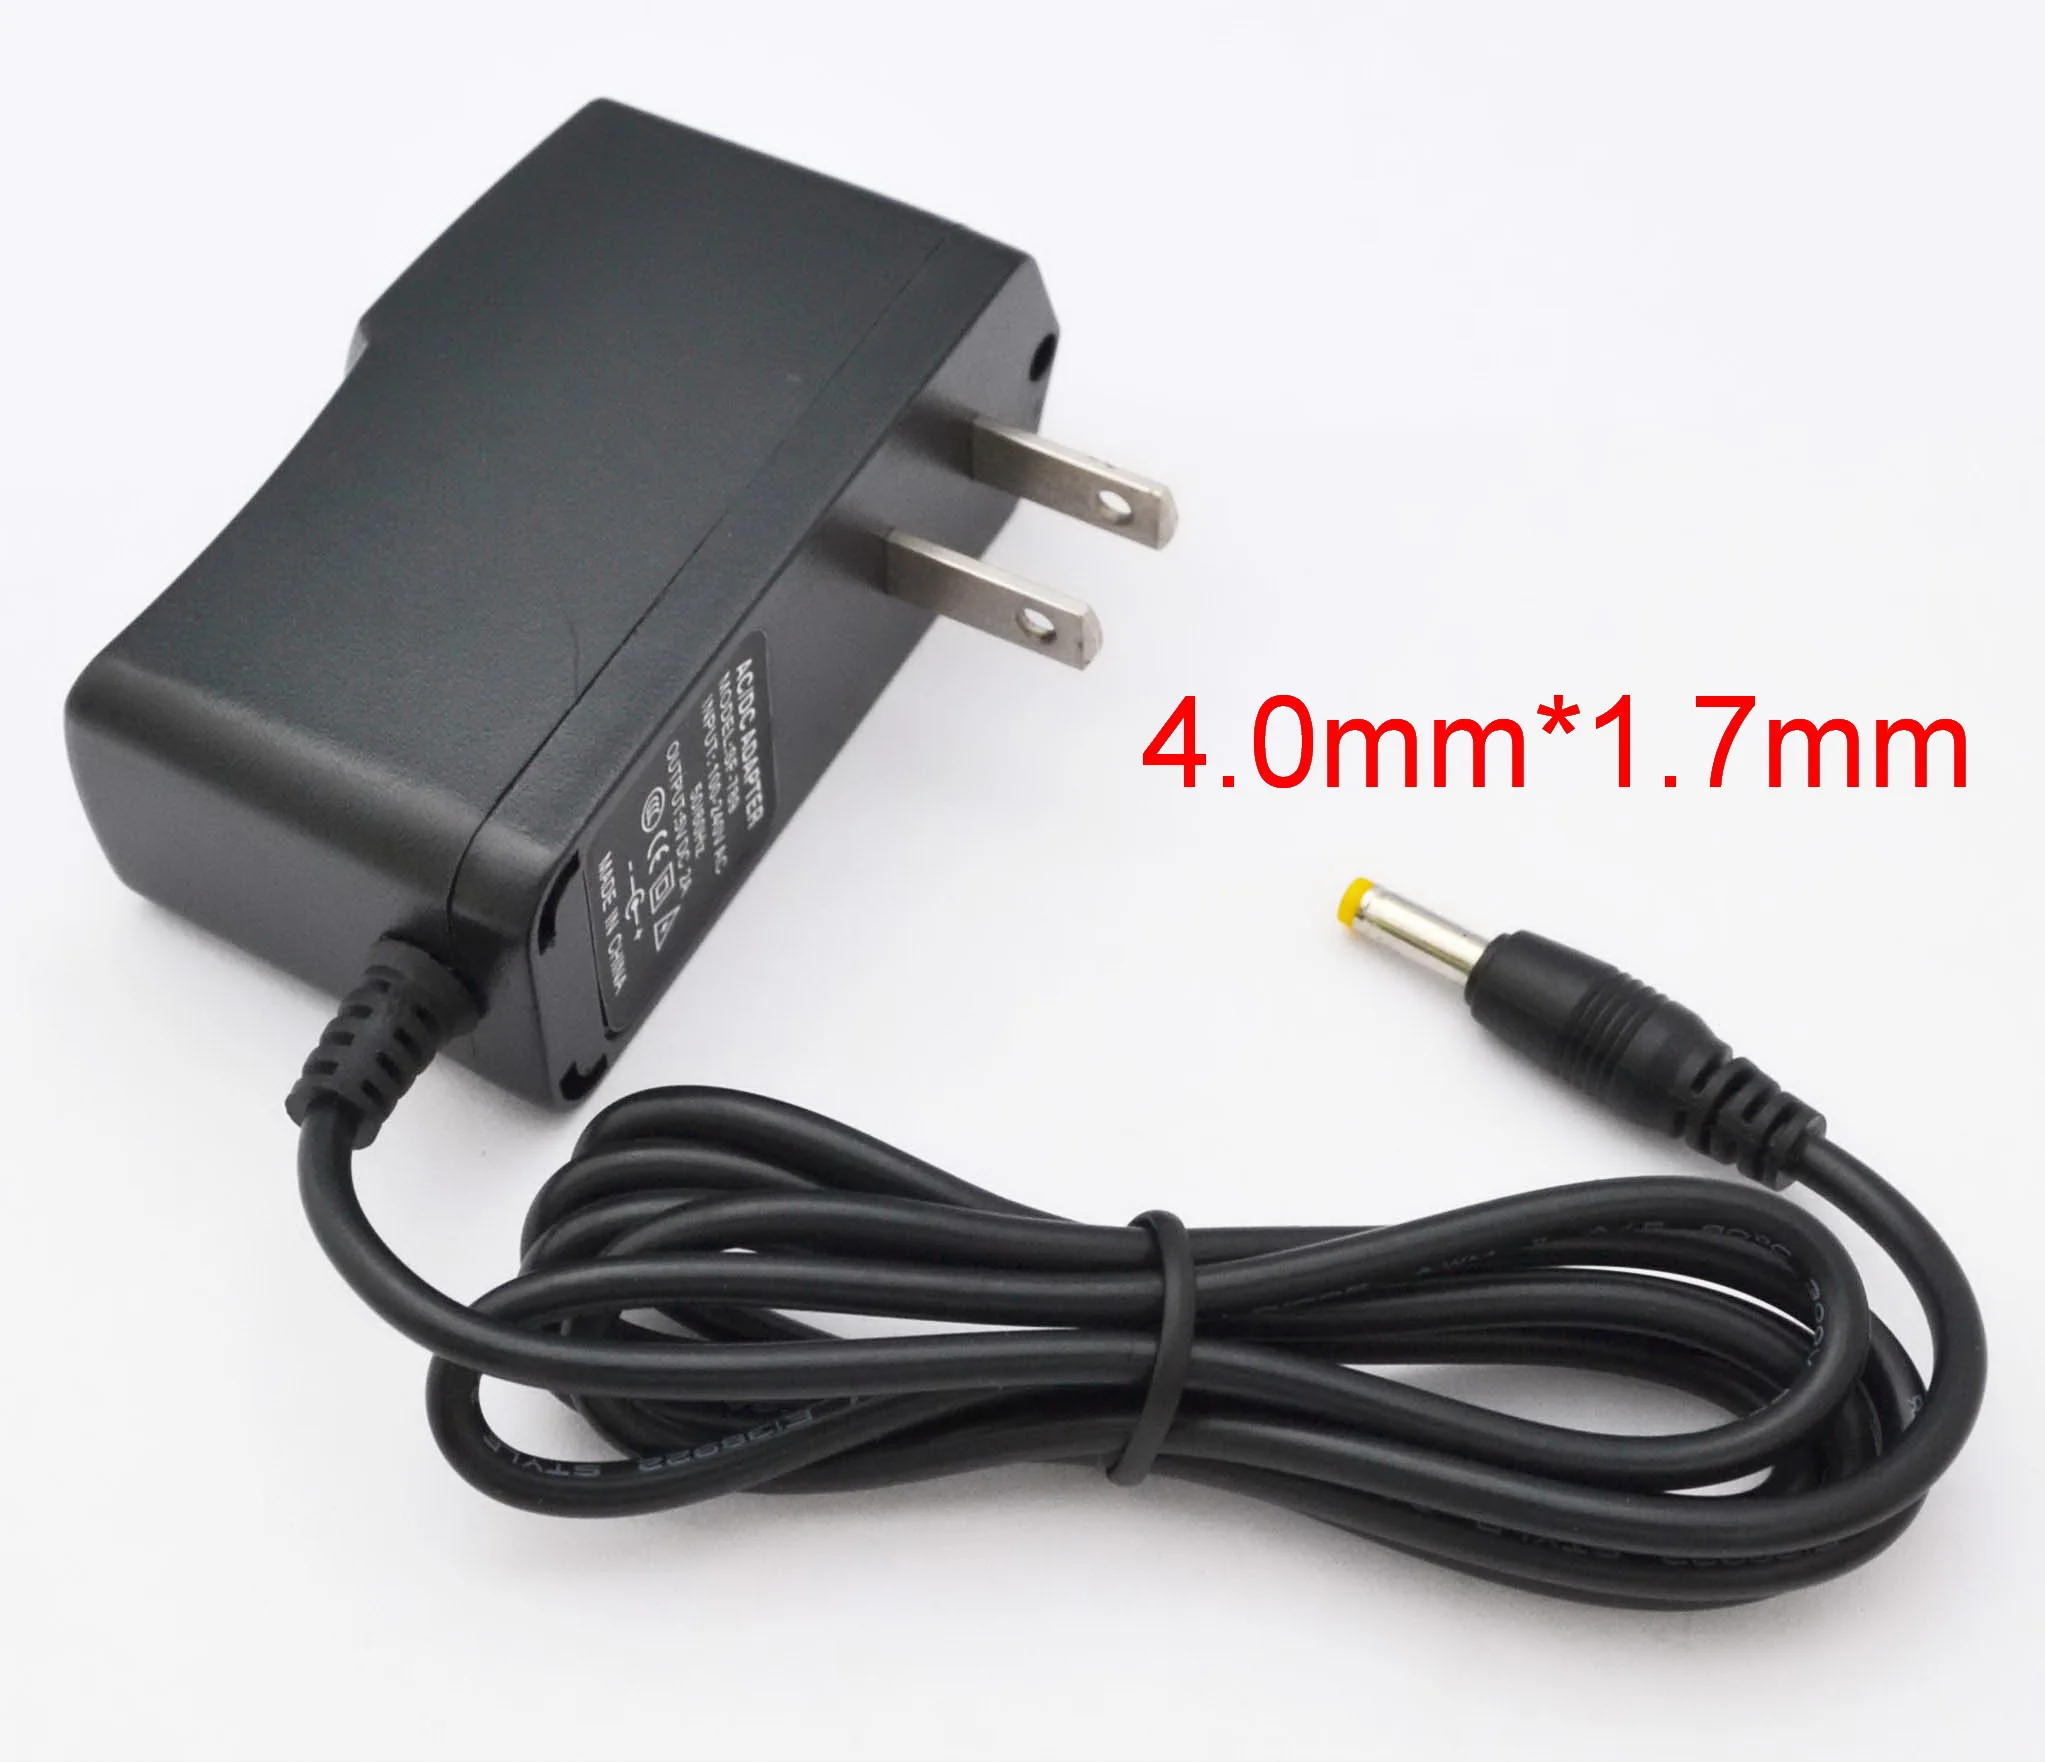 1PCS High quality DC 9.5V 1A IC program AC Adapter Charger For Casio Keyboard Pianos CTK-245 AD-E95100L ADE95100L US plug - ANKUX Tech Co., Ltd